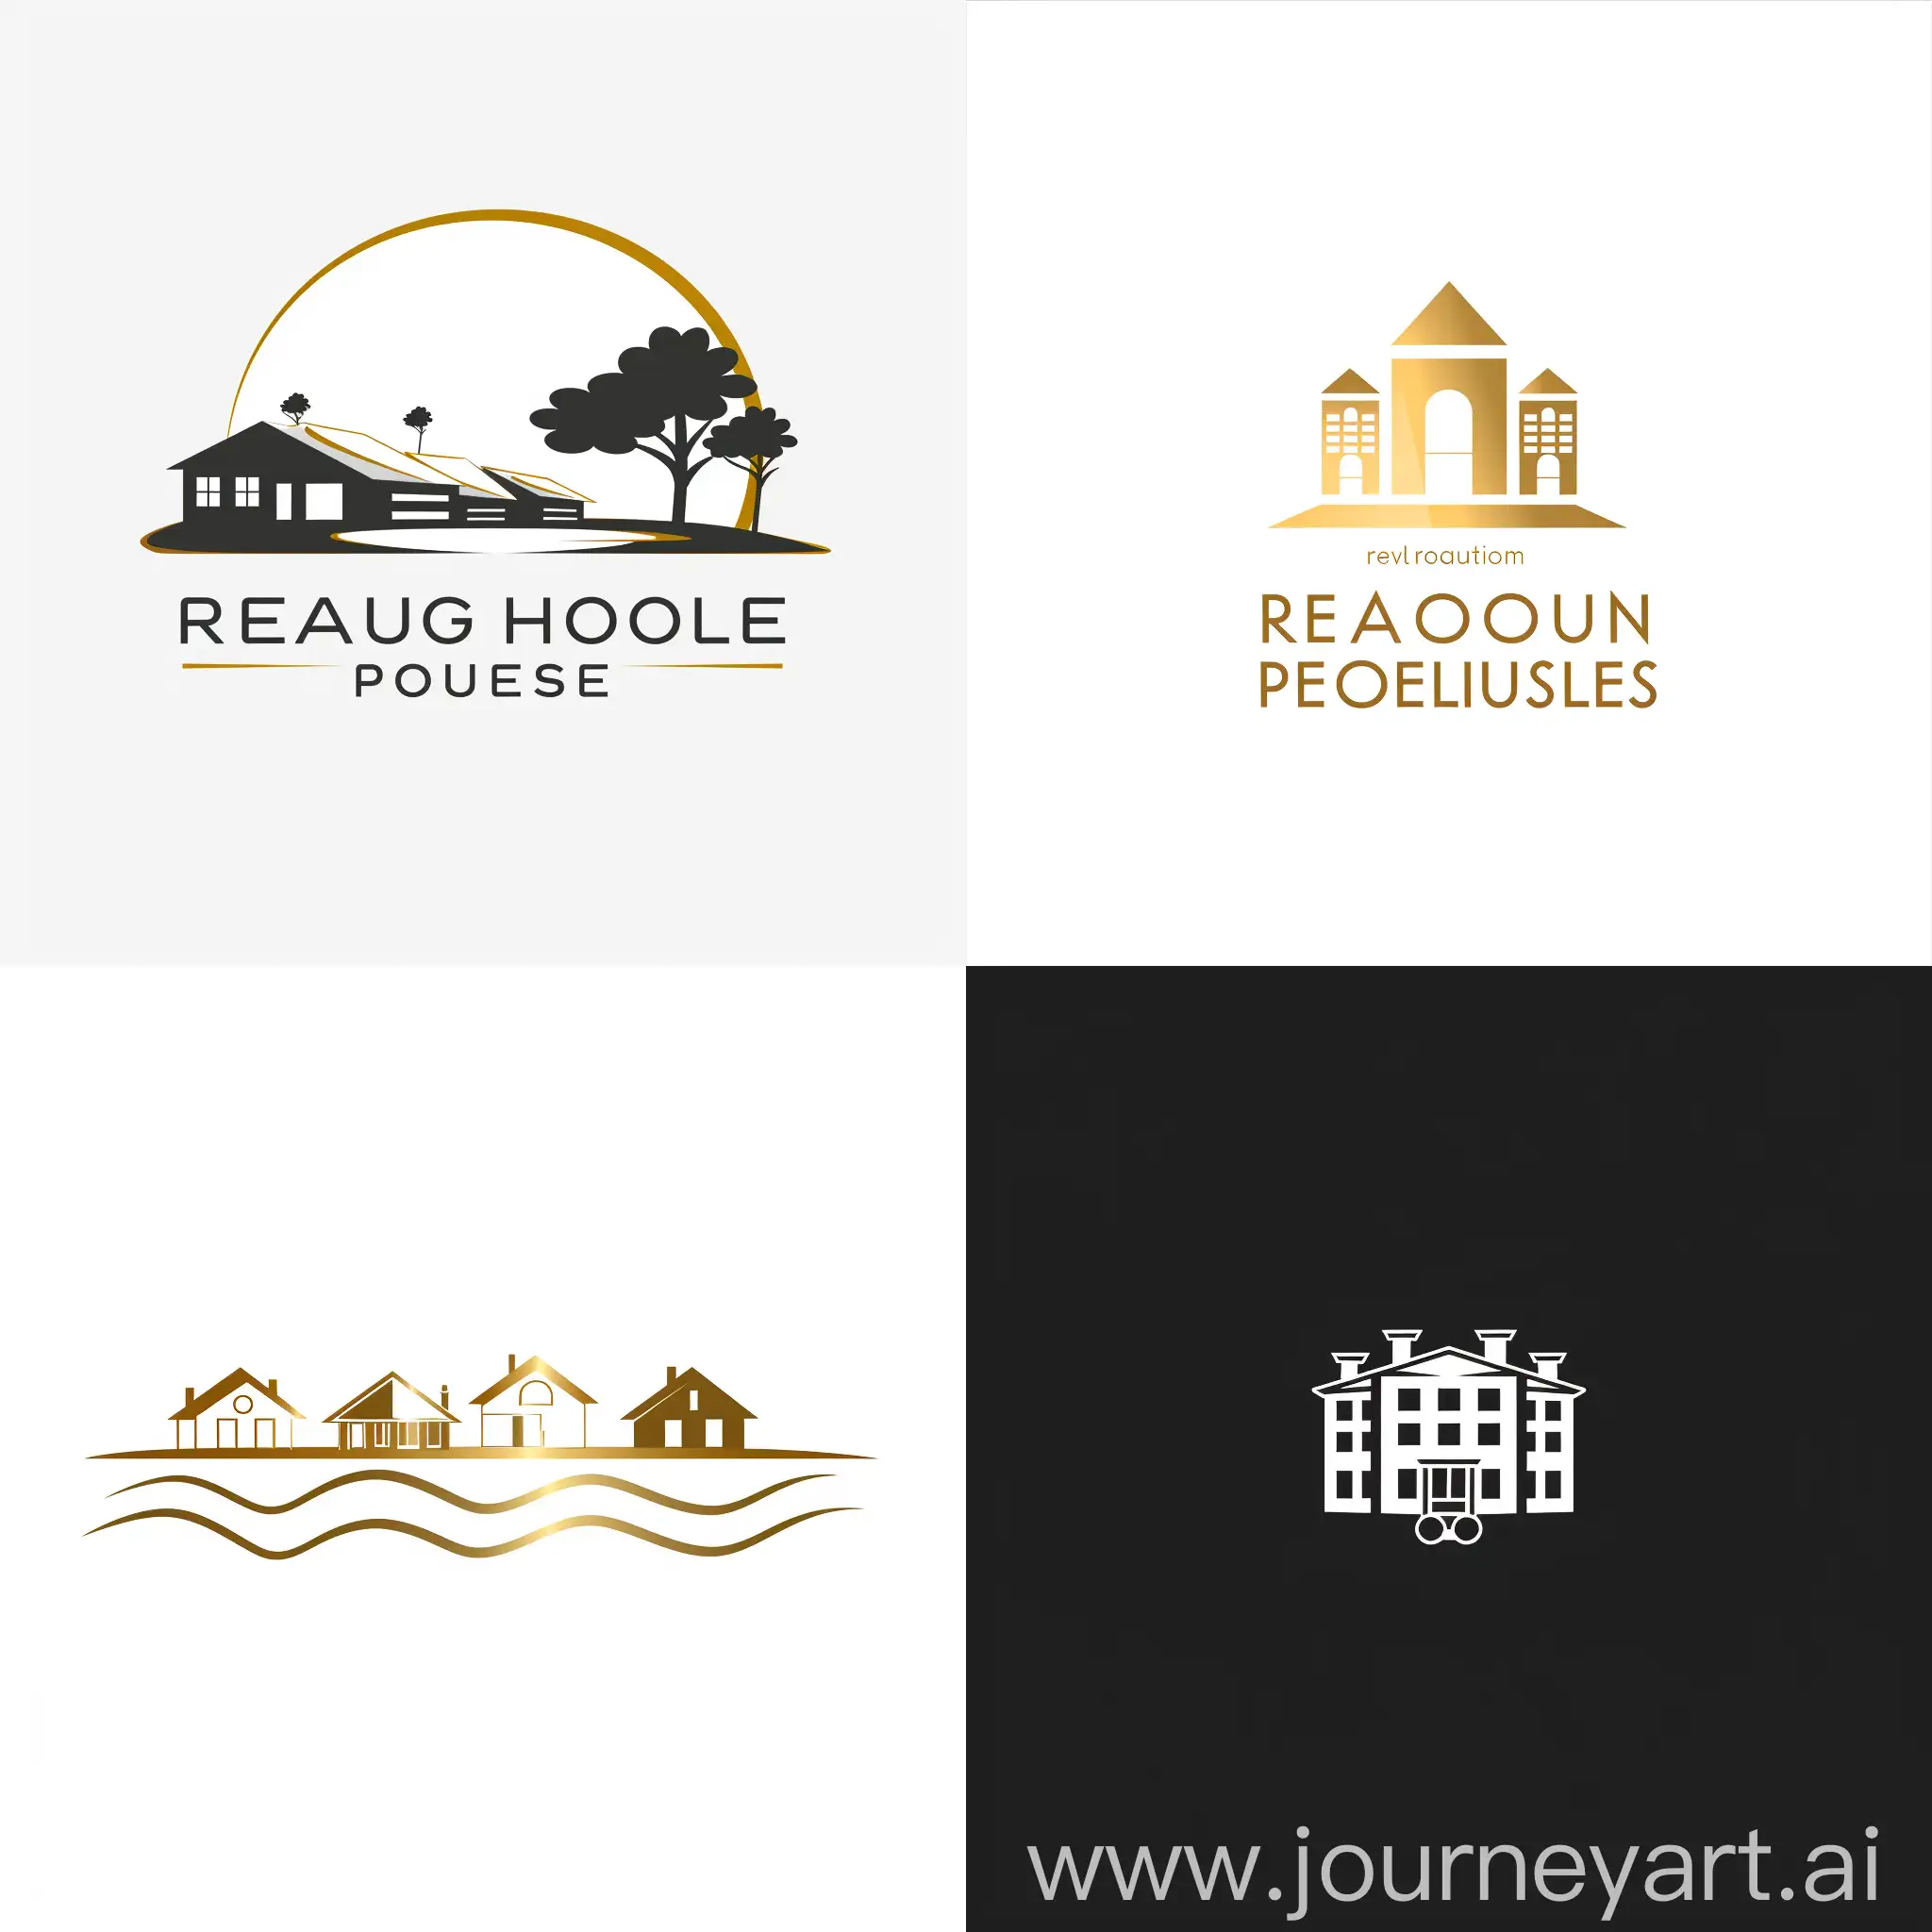 
stilous luxurious properties minimalist logo for real estate agent, no details, back and white, no colors, white background color